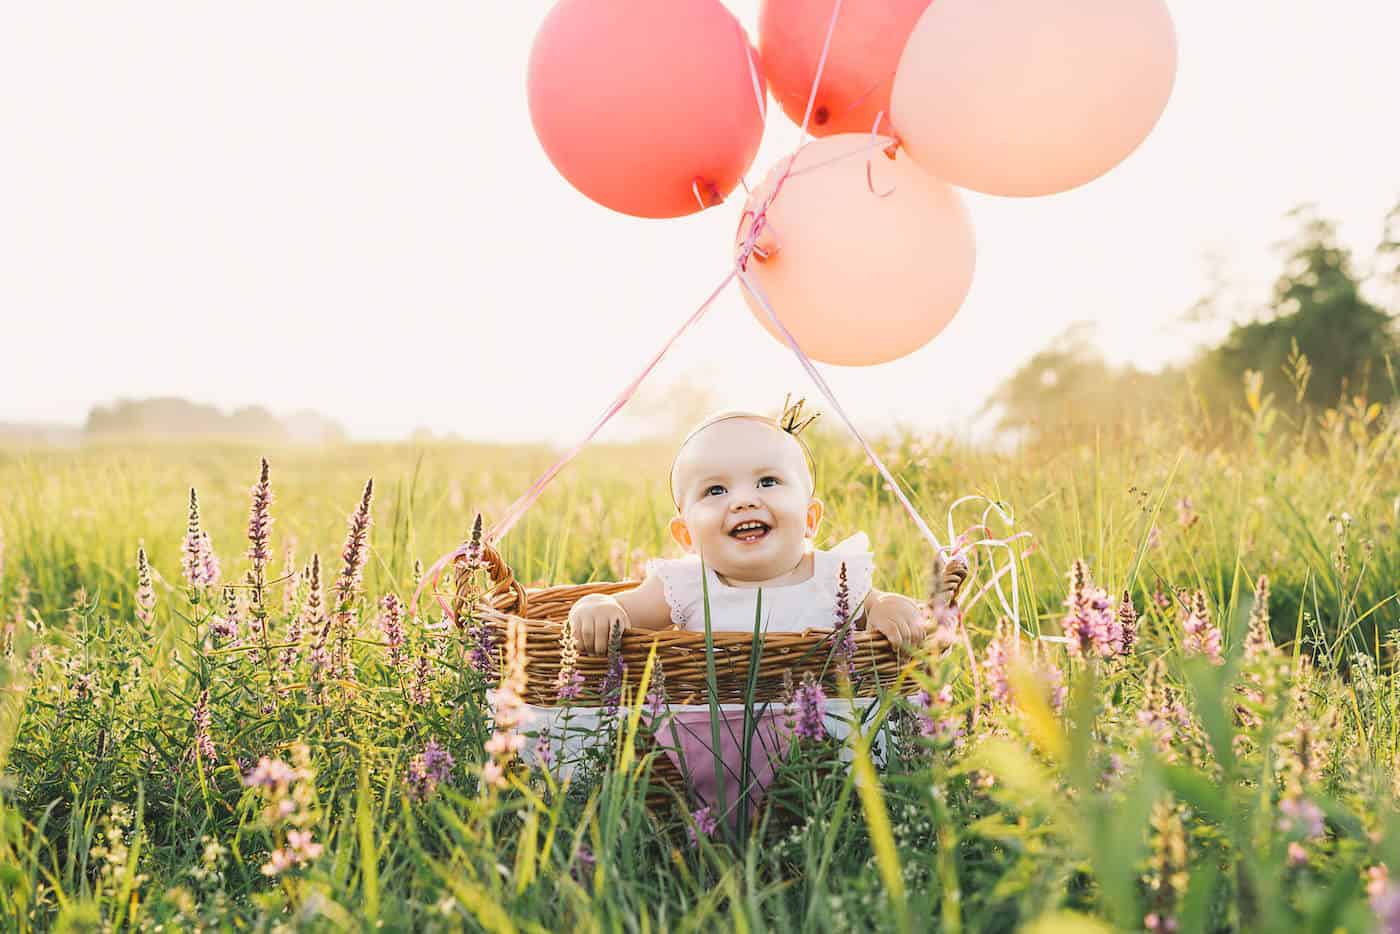 baby girl with balloons in field